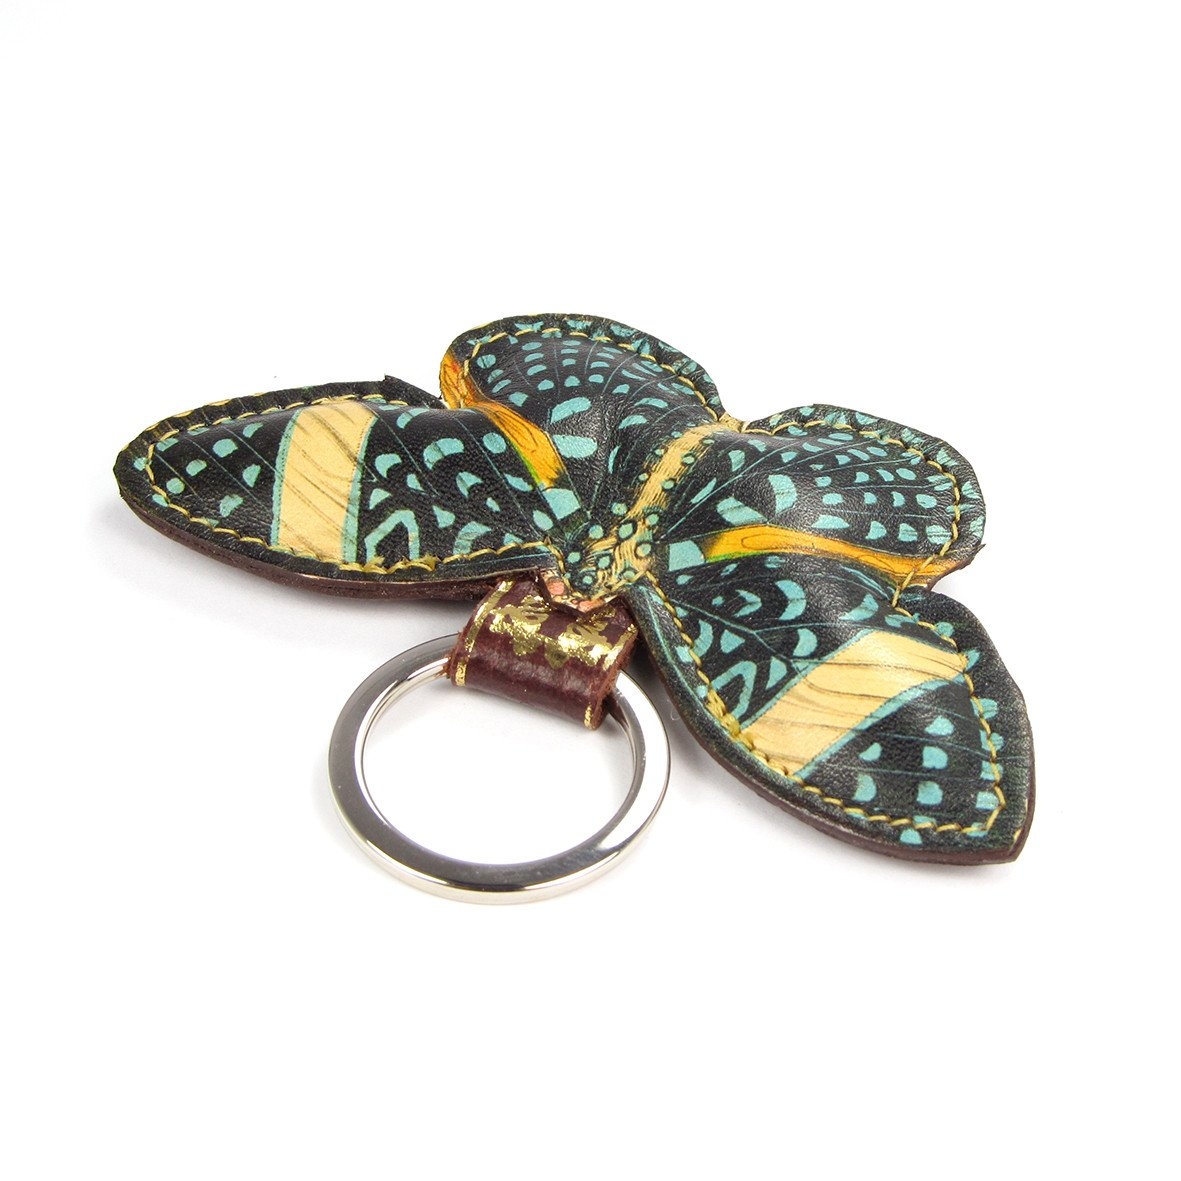 Leather Key Ring / Bag Charm – Speckled Gem Butterfly – Green